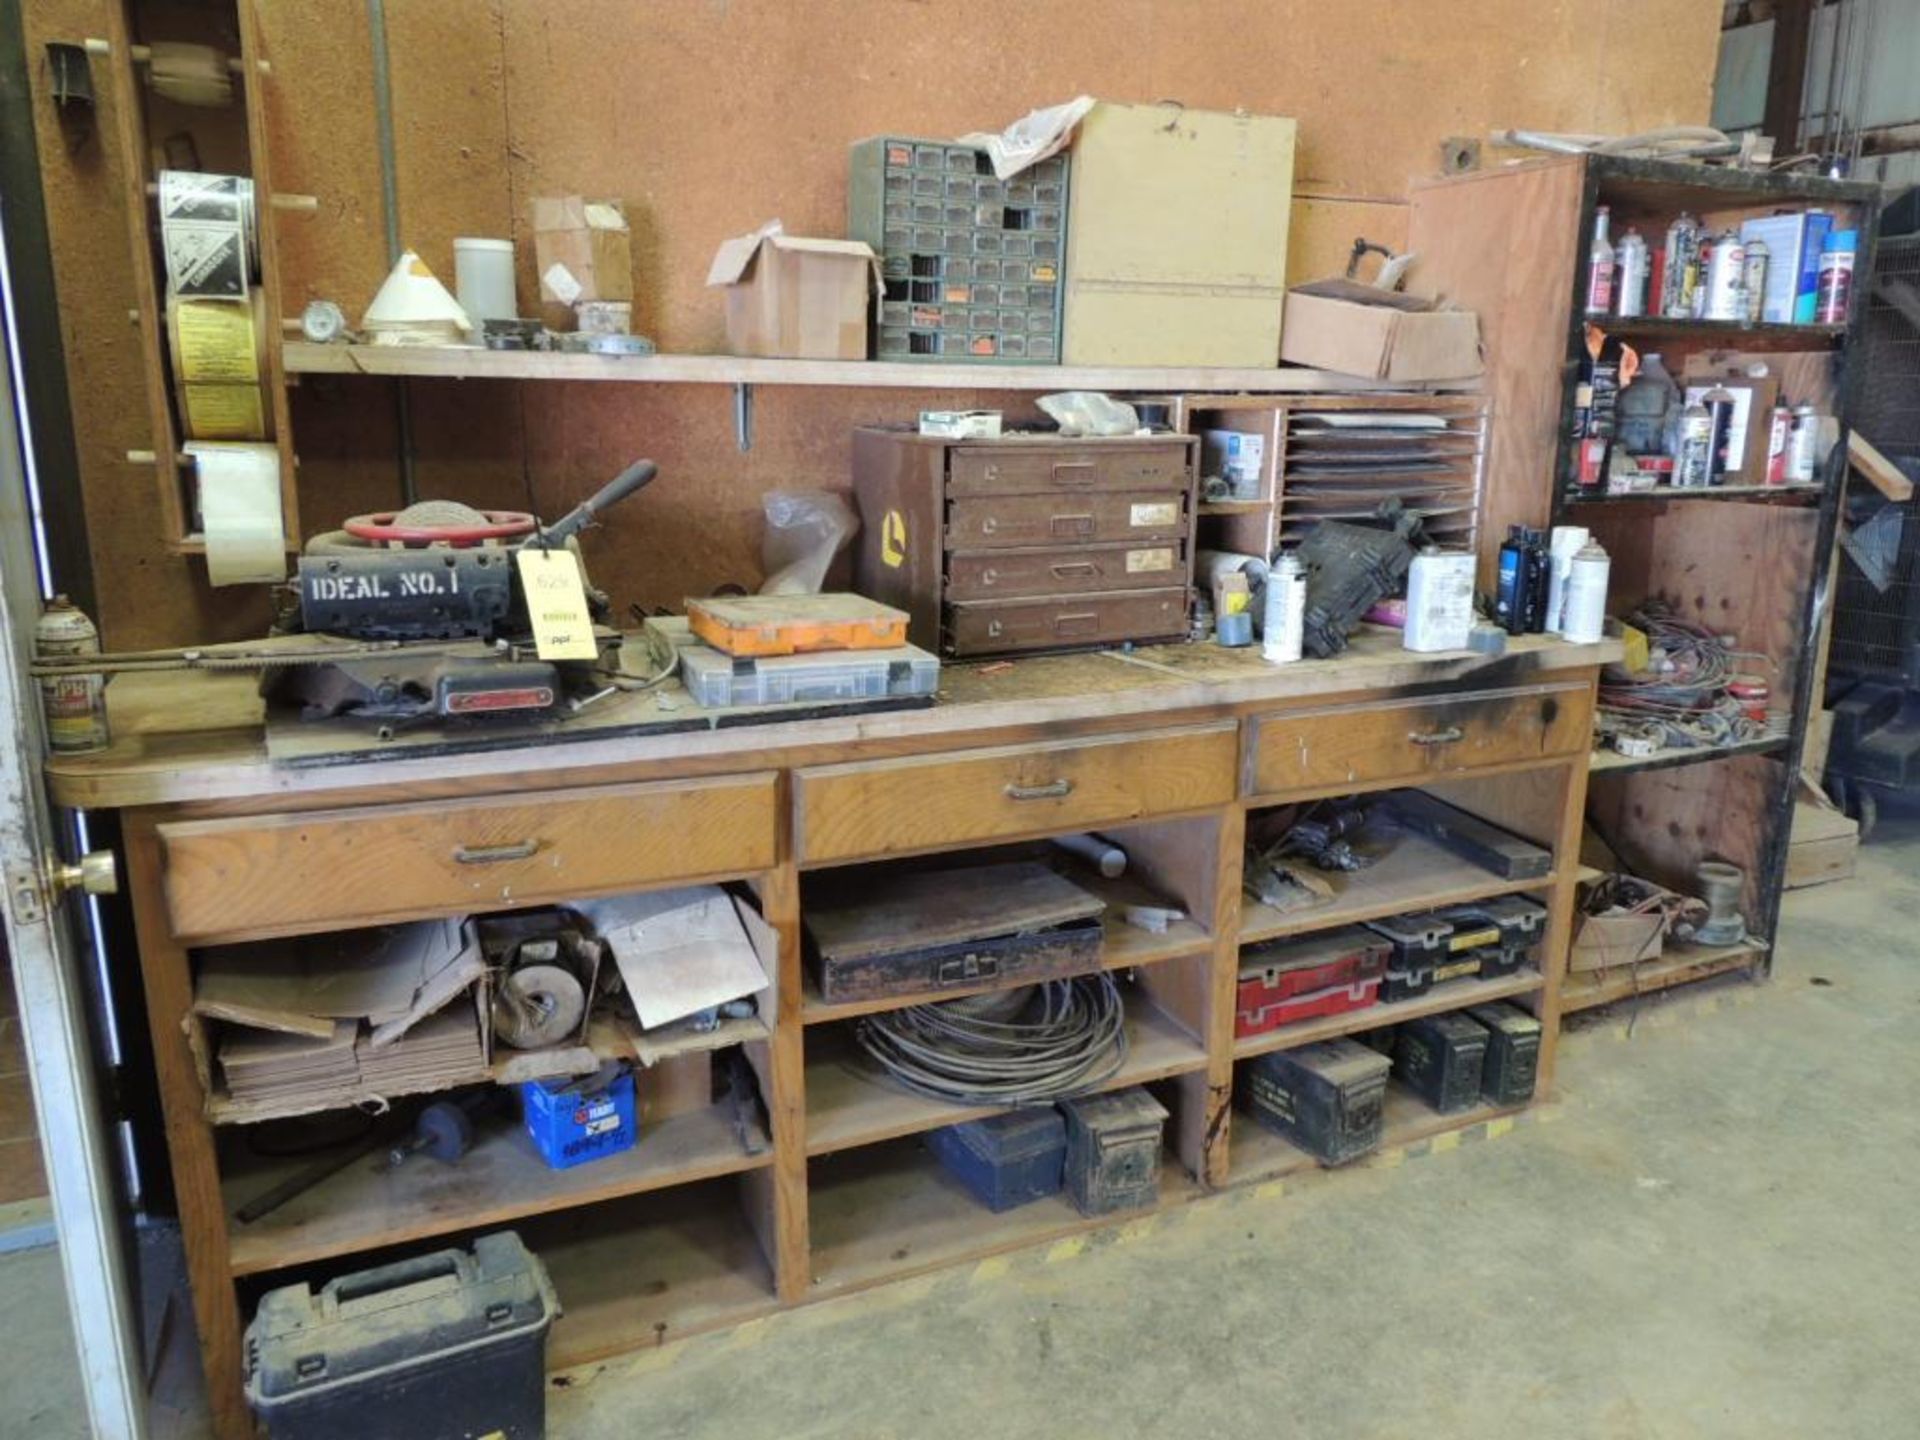 LOT: Ideal #1 Stencil Machine, Wood Work Bench, Lawson 4-Drawer Cabinet, Assorted Fittings (